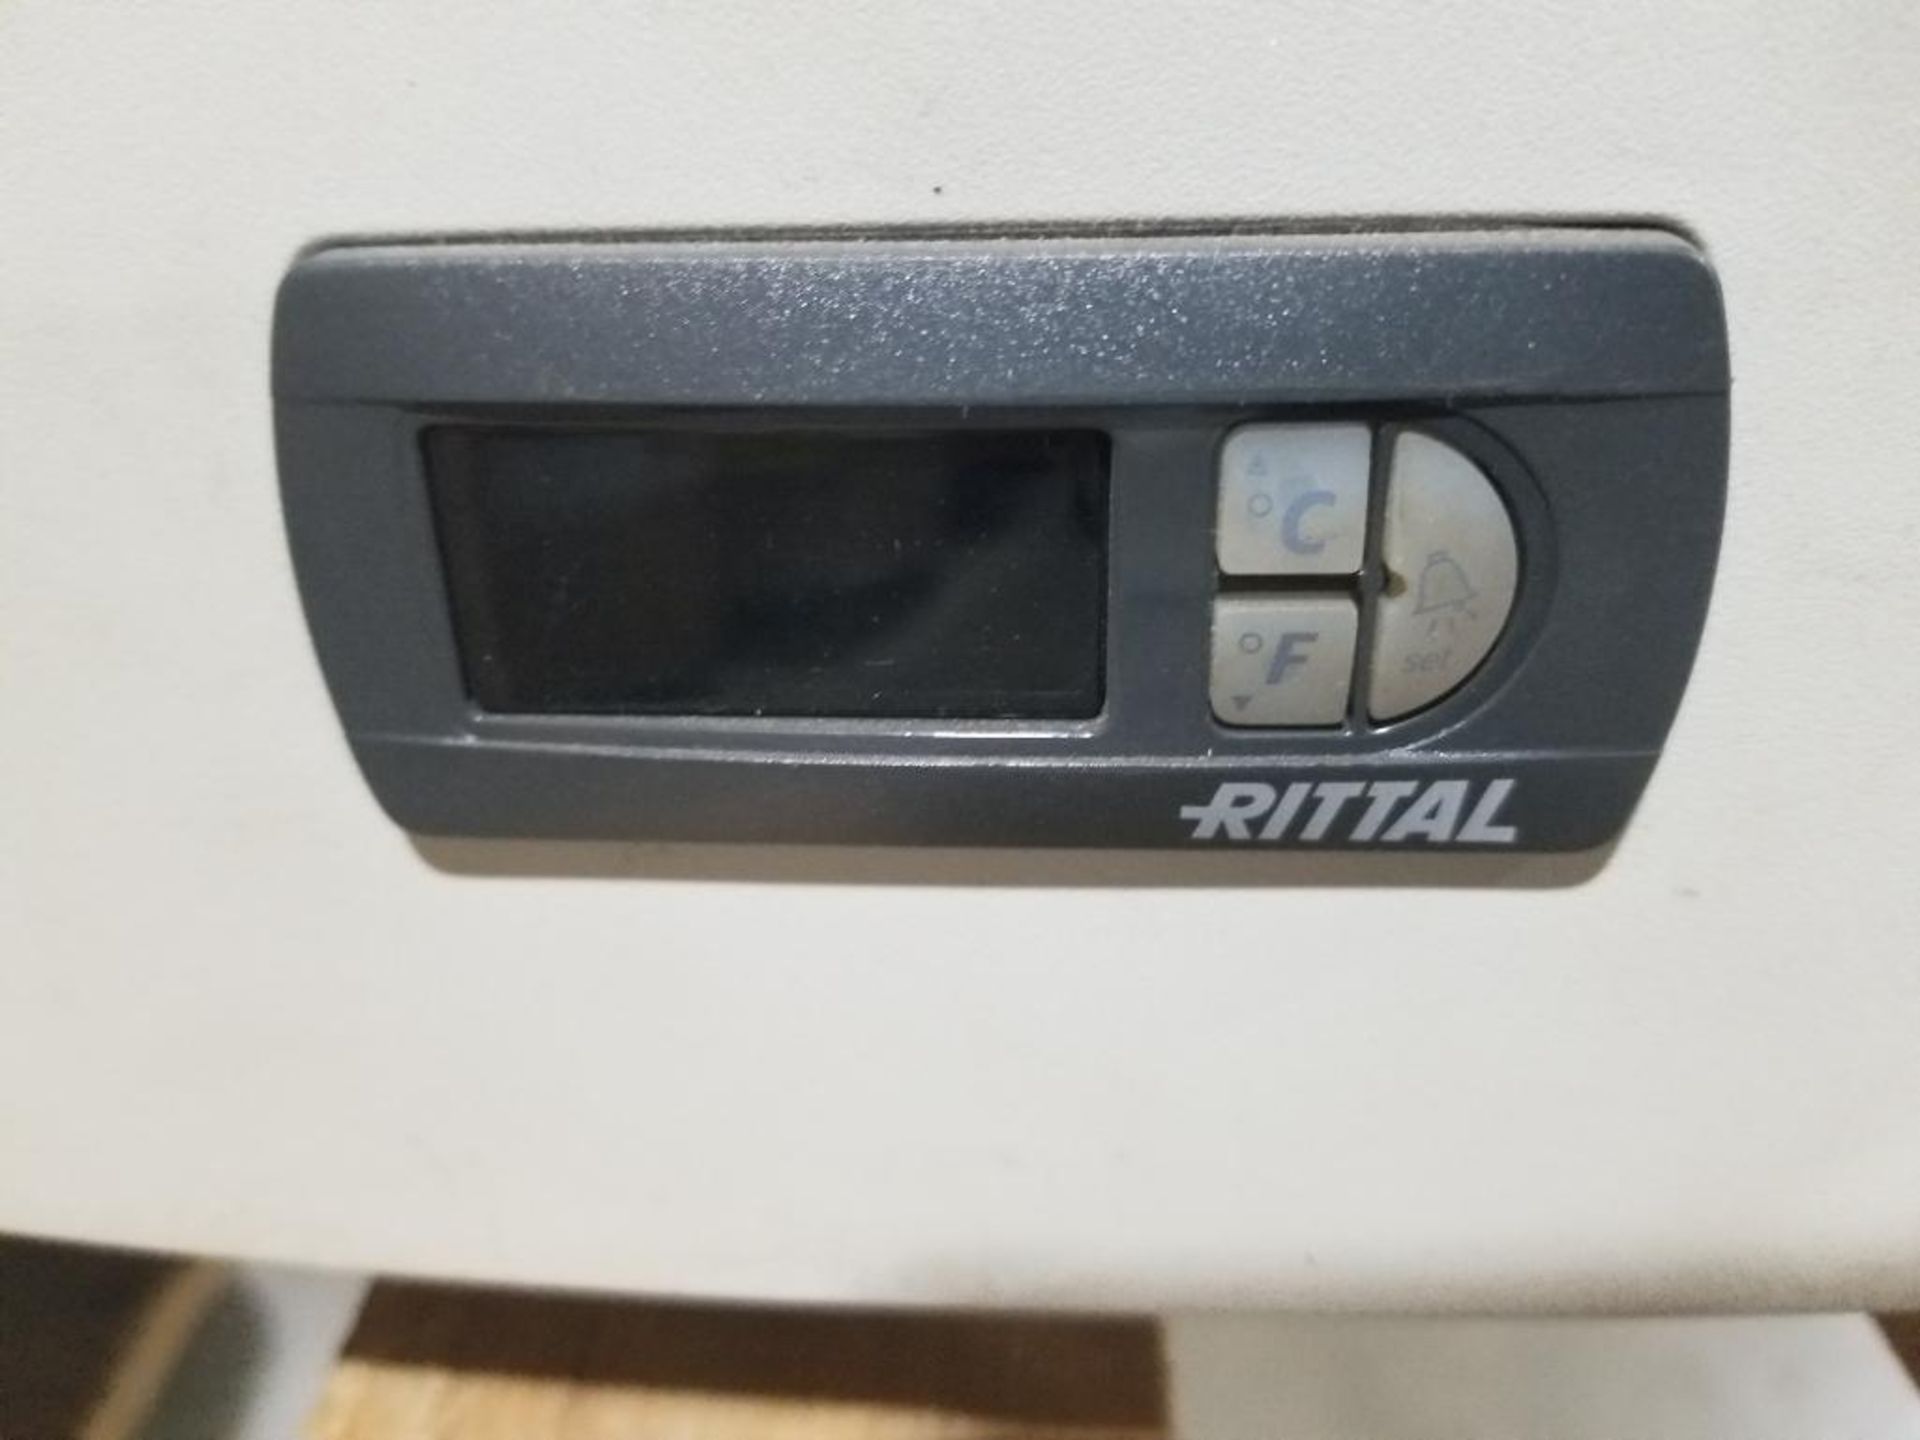 Rittal top therm cabinet air conditioner. Model SK-3385546. - Image 5 of 6